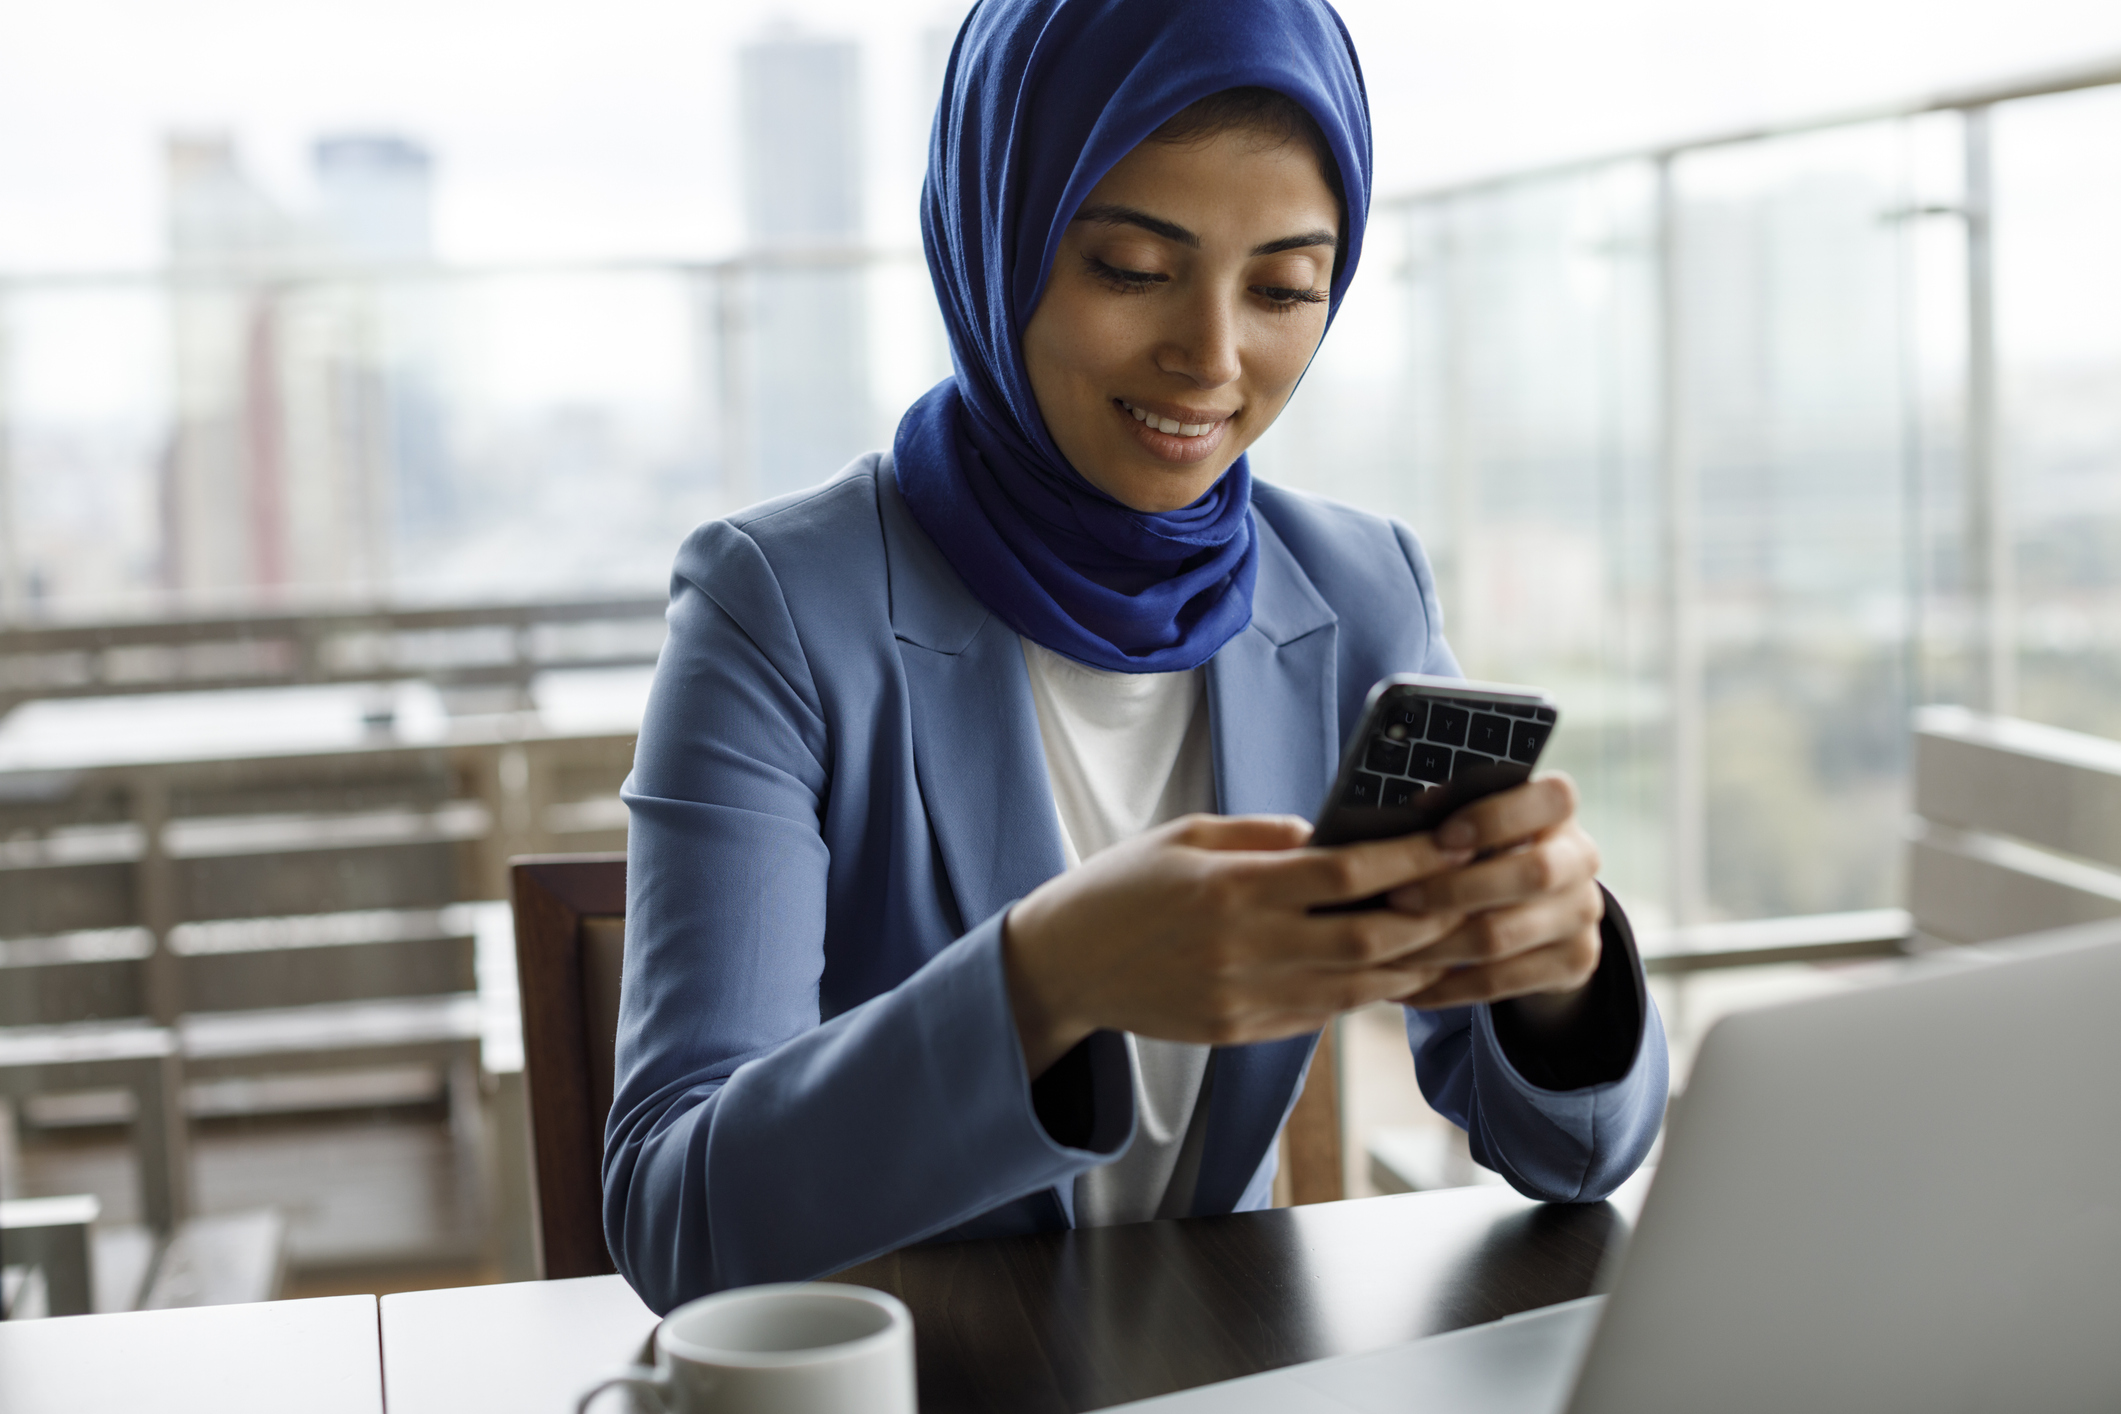 Smiling young muslim woman using mobile phone and laptop at a cafe